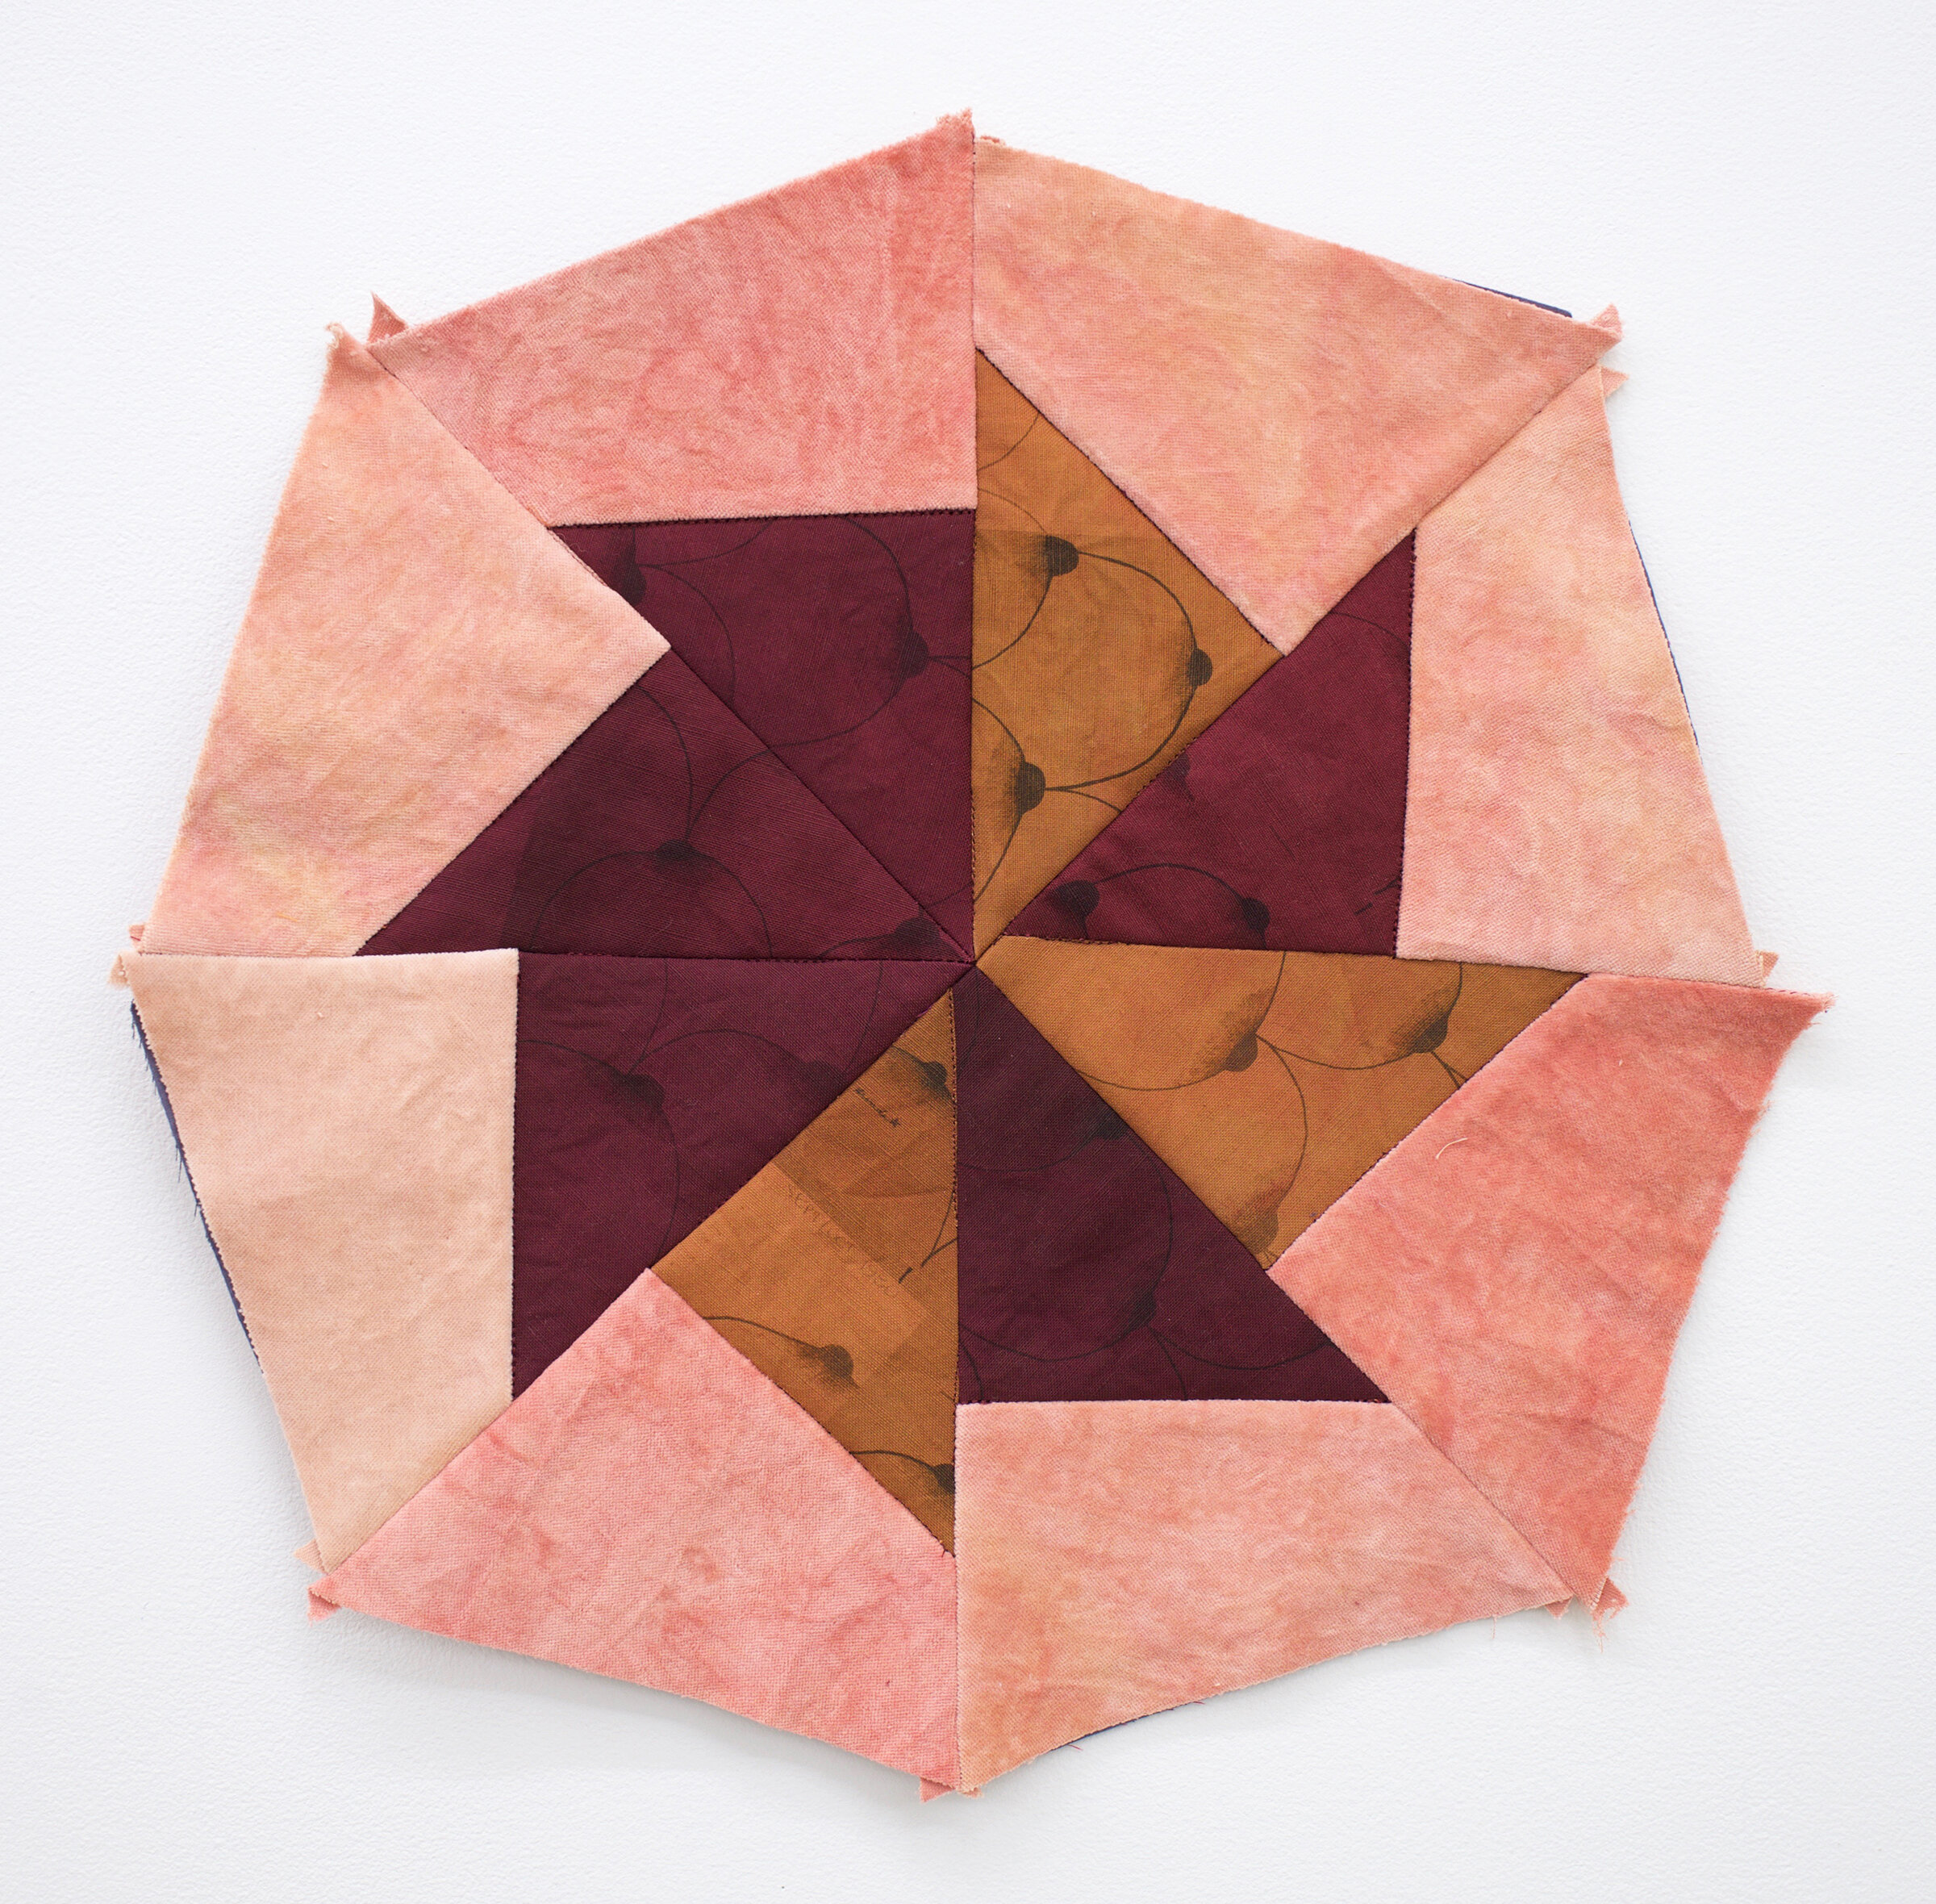  AMANDA CURRERI  Wheel of Fortune, Velvet Dinah* , 2021 Cochineal, madder root, and weld on velvet and digitally printed fabric, 16” x 16”    